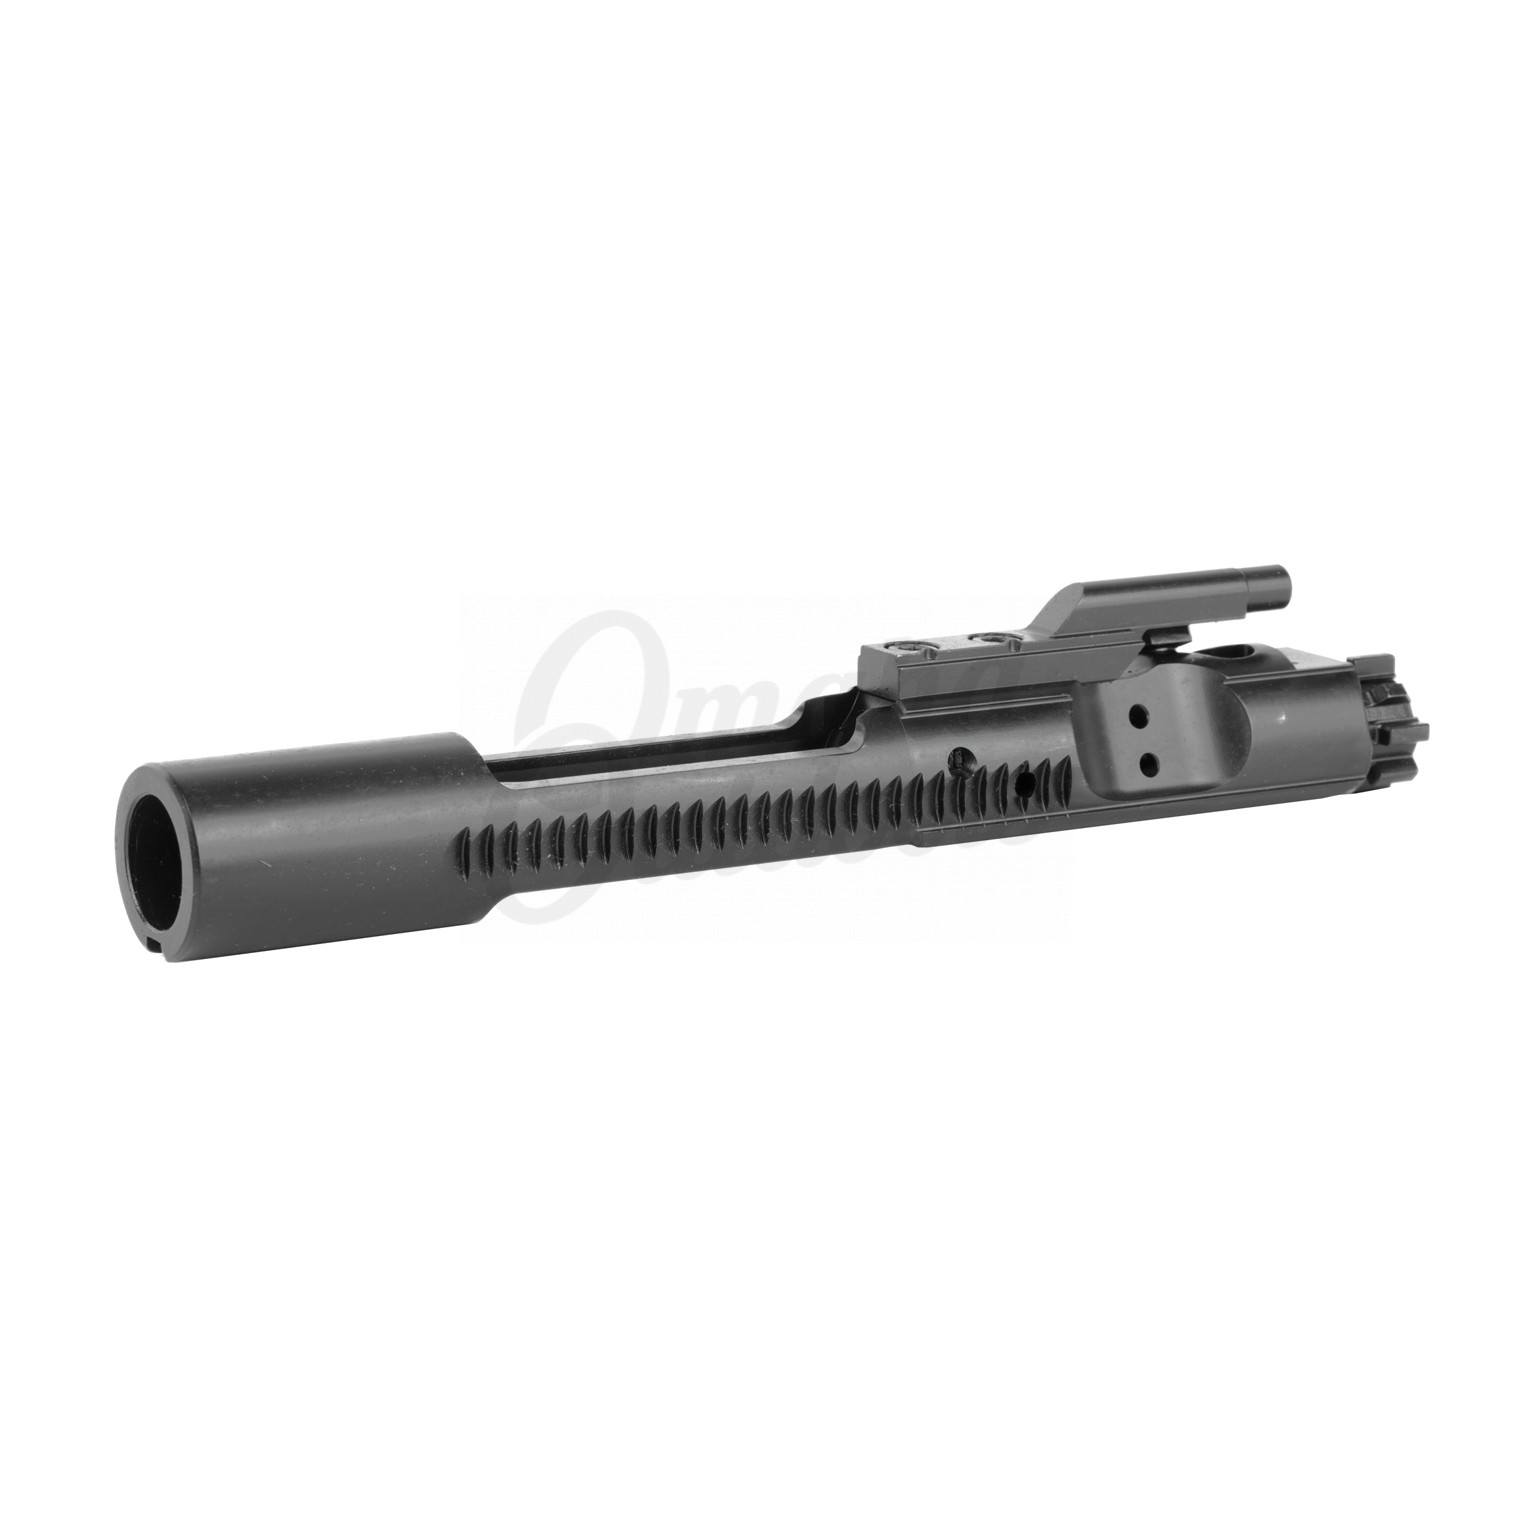 ZEROED Muzzle Brake 5.56mm  CMMG - AR 15 and AR 10 Builds and Parts